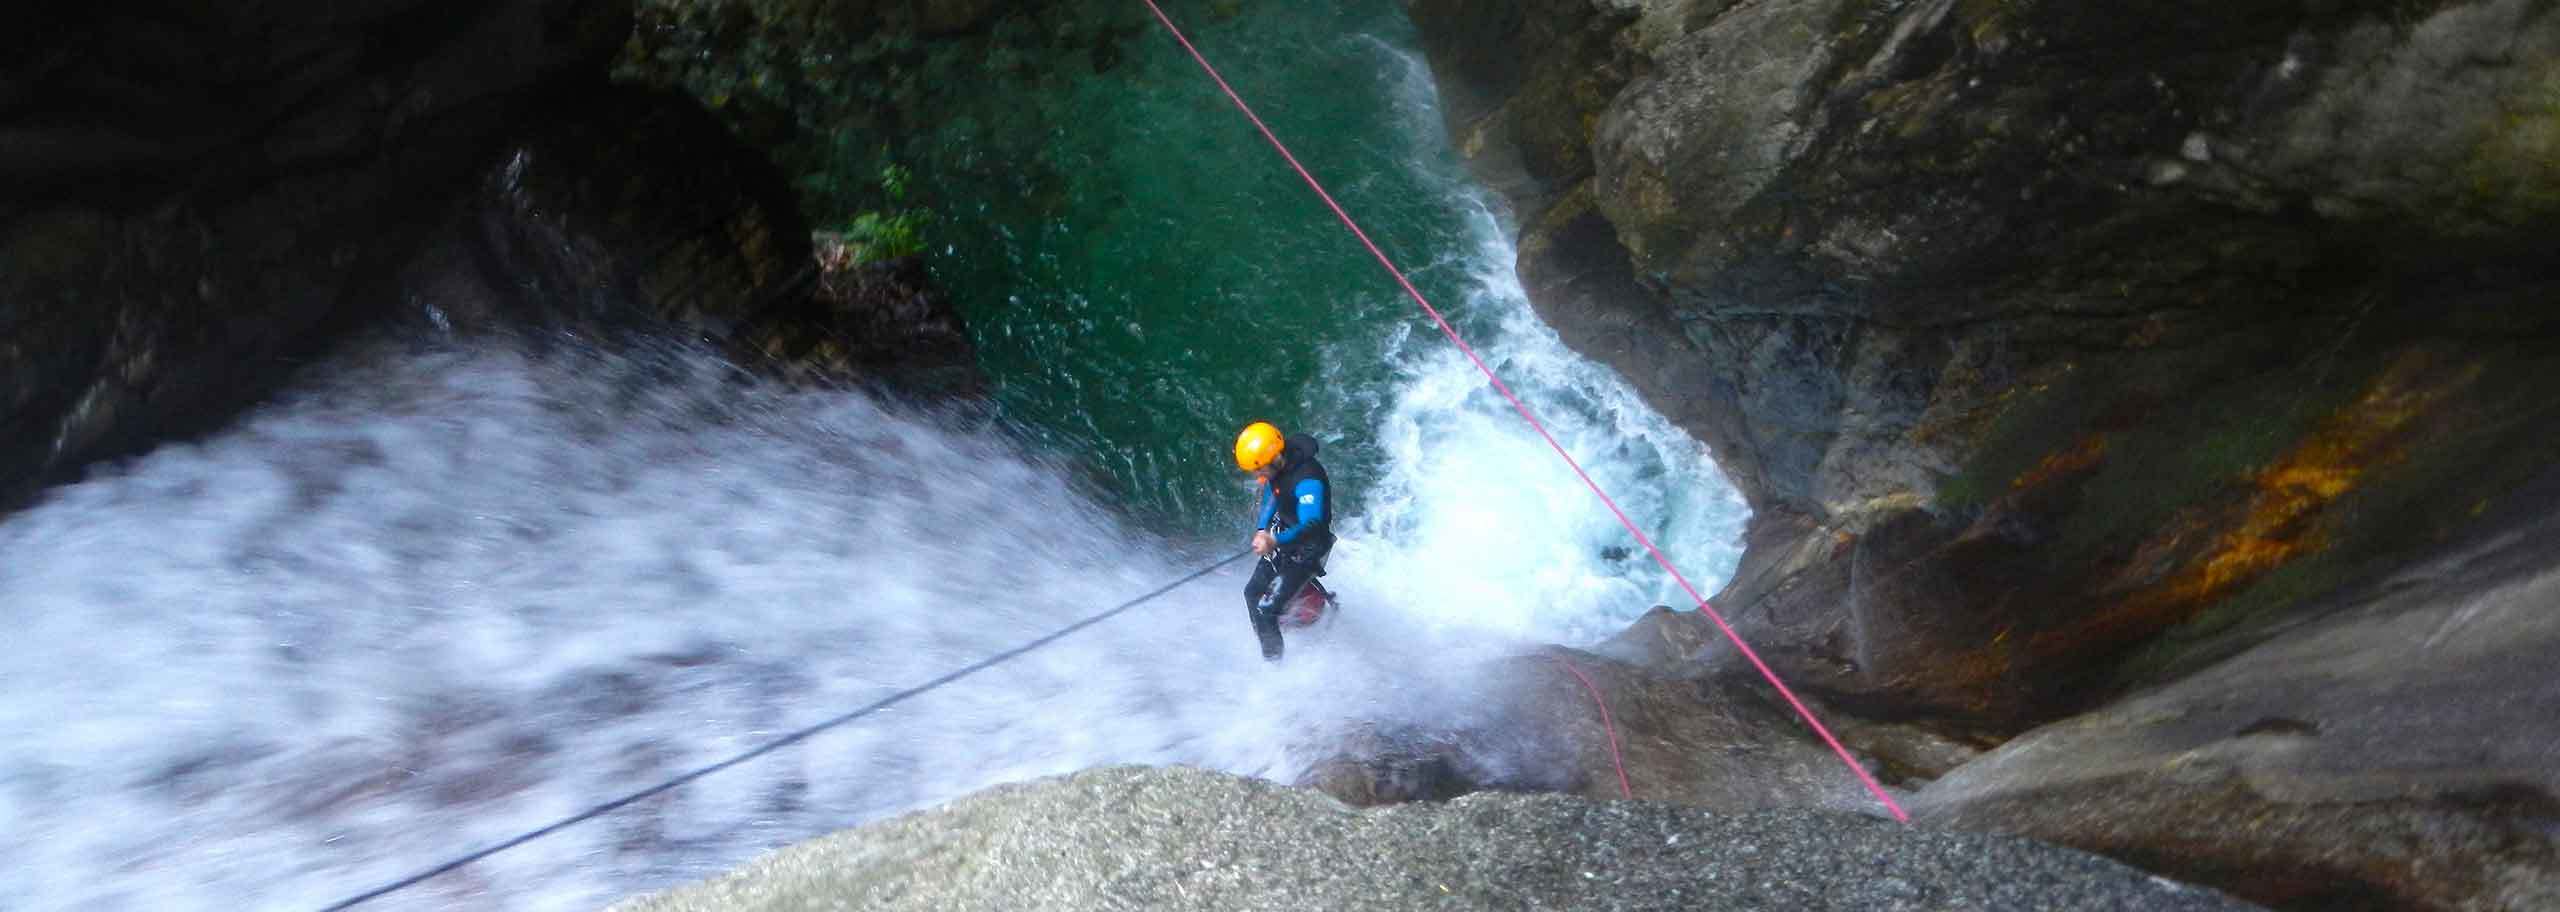 Canyoning in the Dolomites